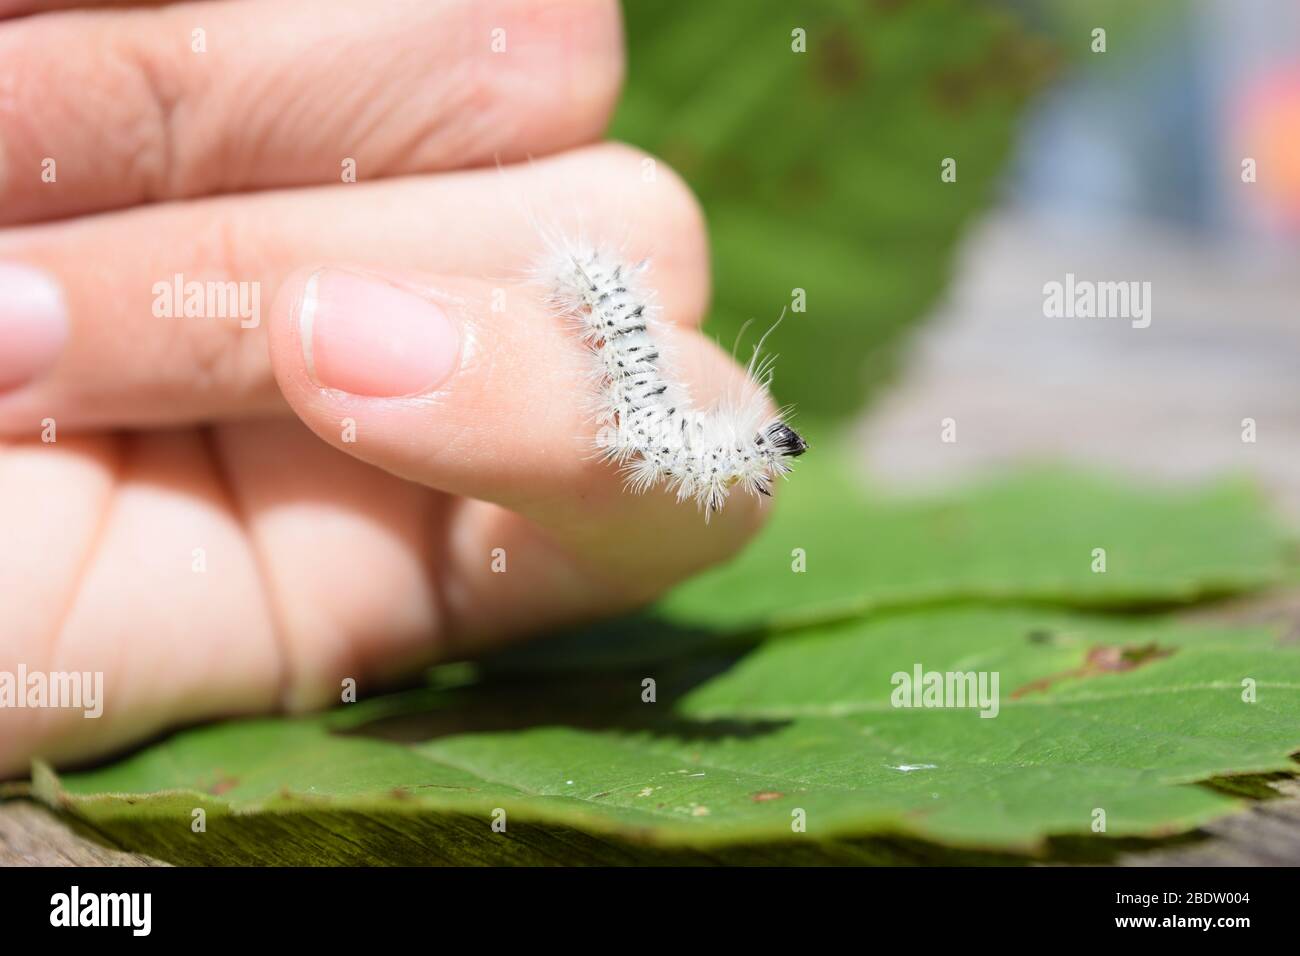 Caterpillar Rash High Resolution Stock Photography and Images - Alamy